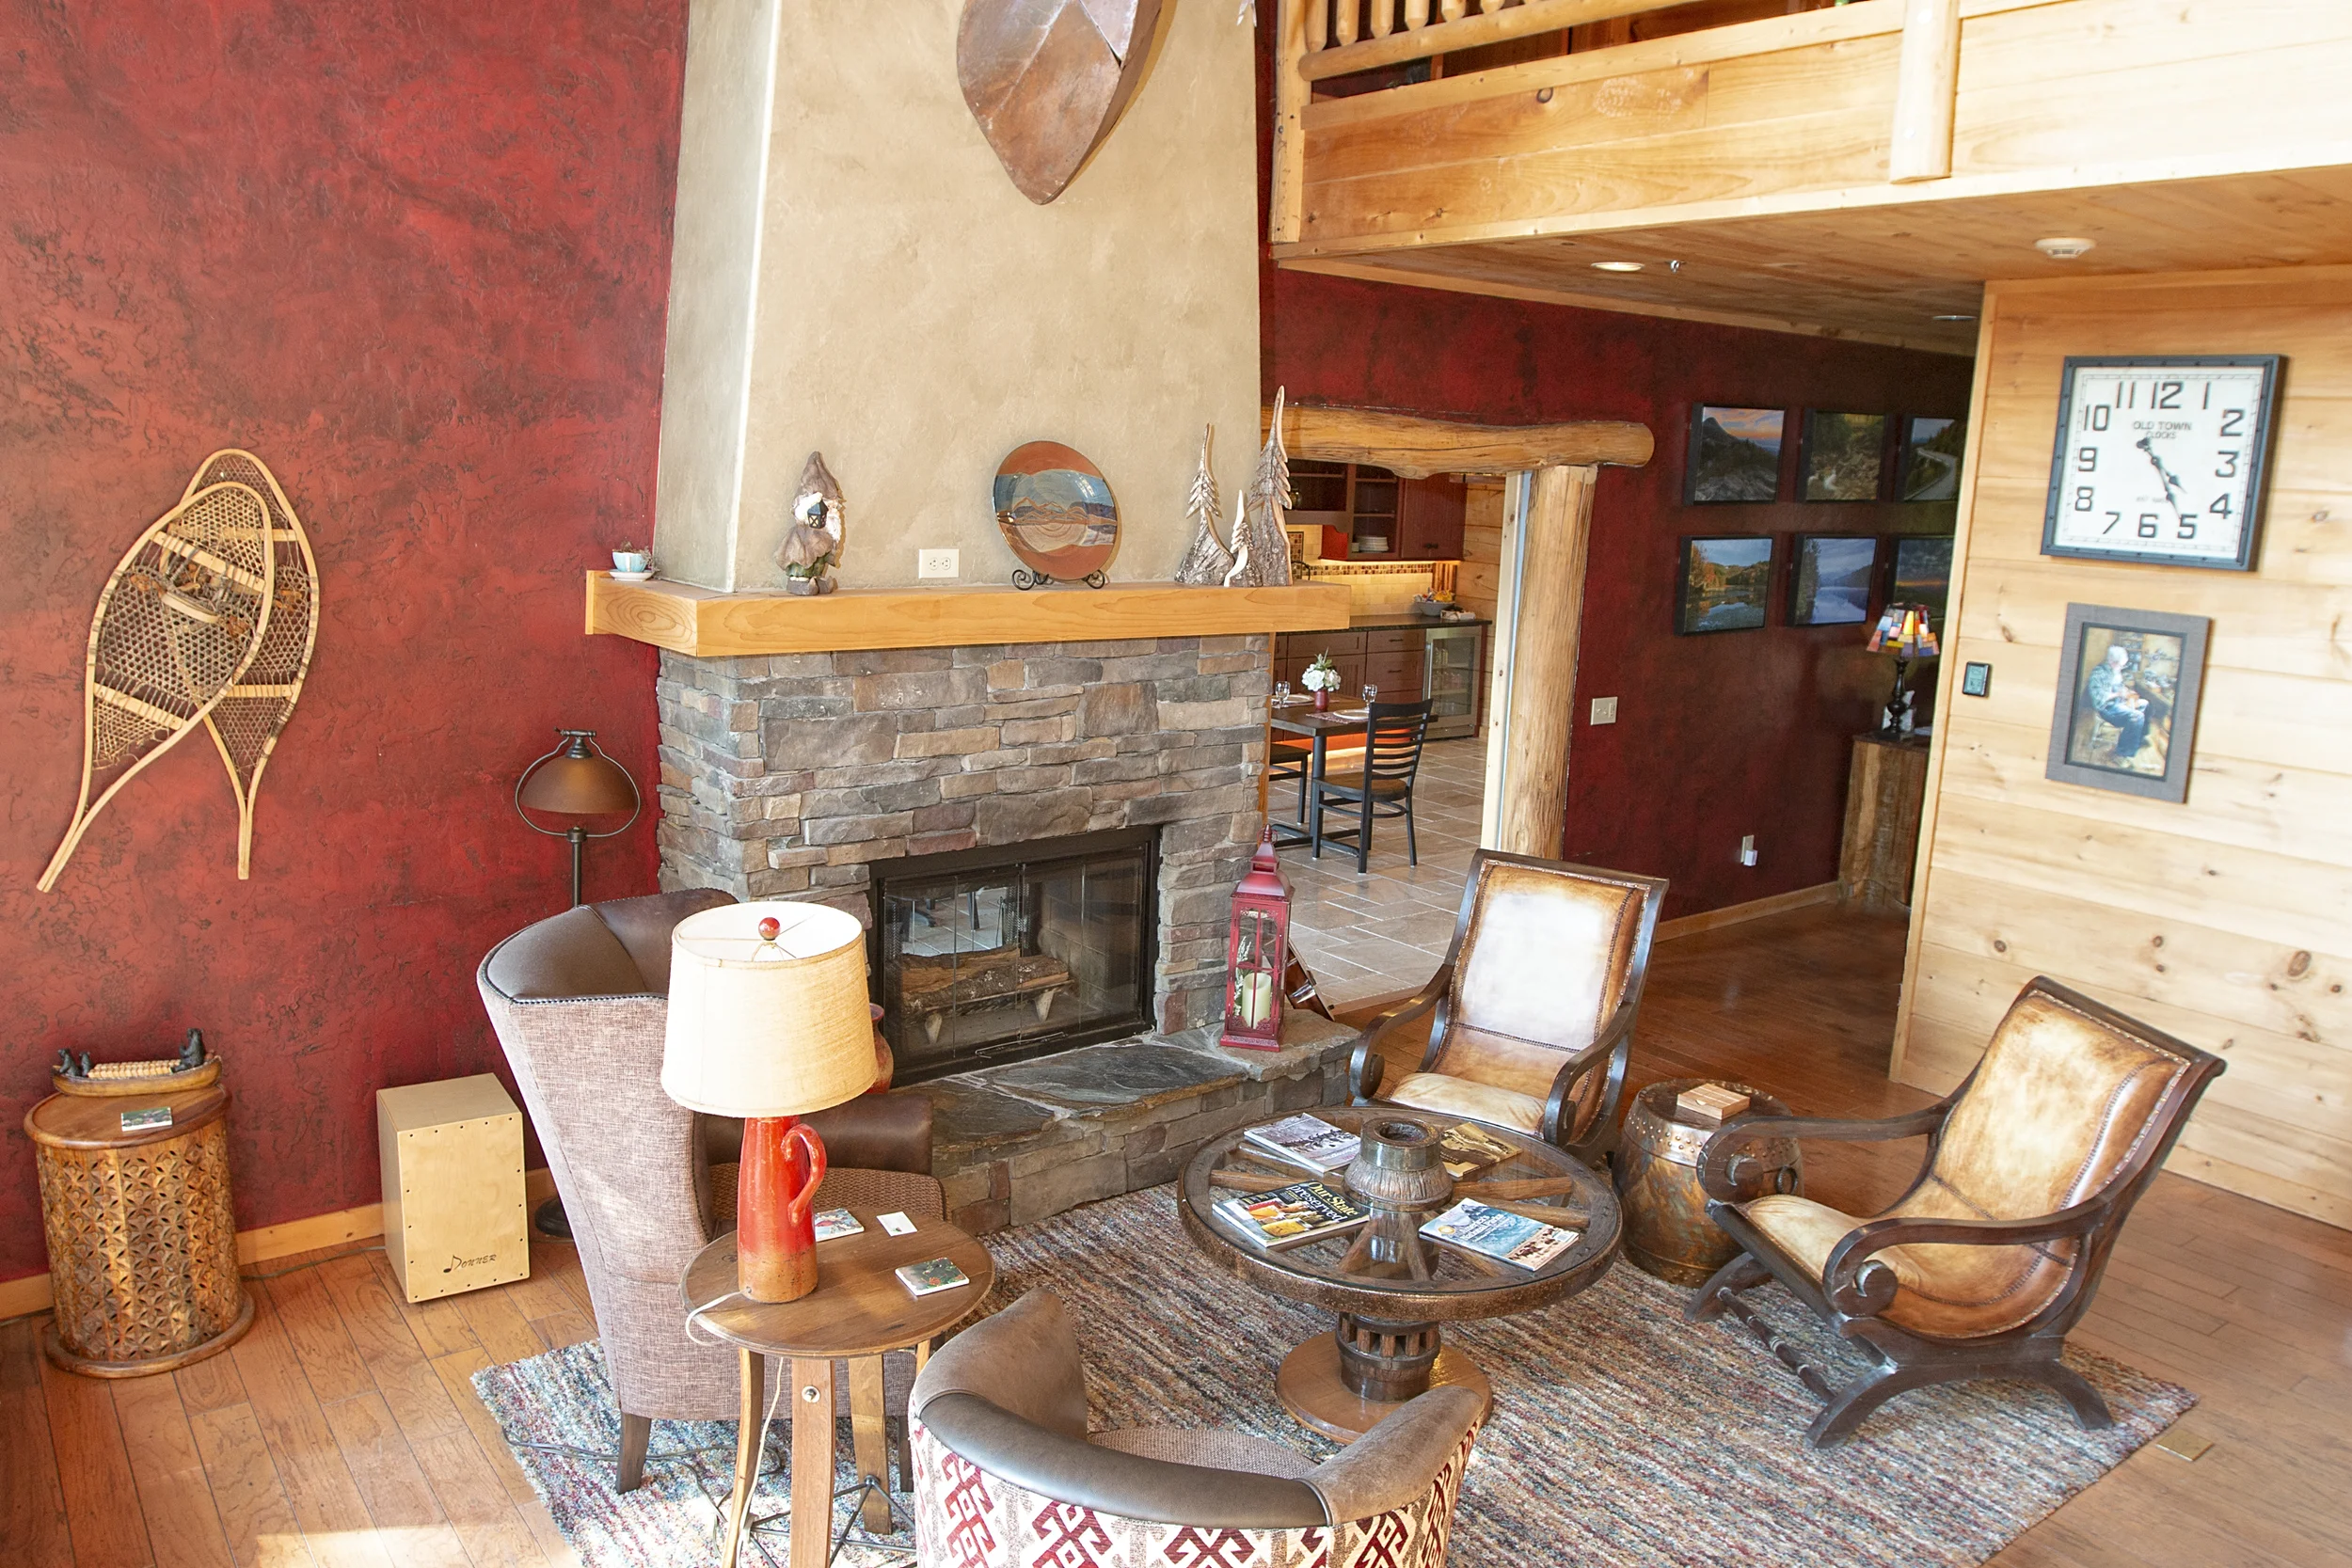 Great room features vaulted fireplace, 6 chairs, chaise lounge and two story windows with upstairs landing above.